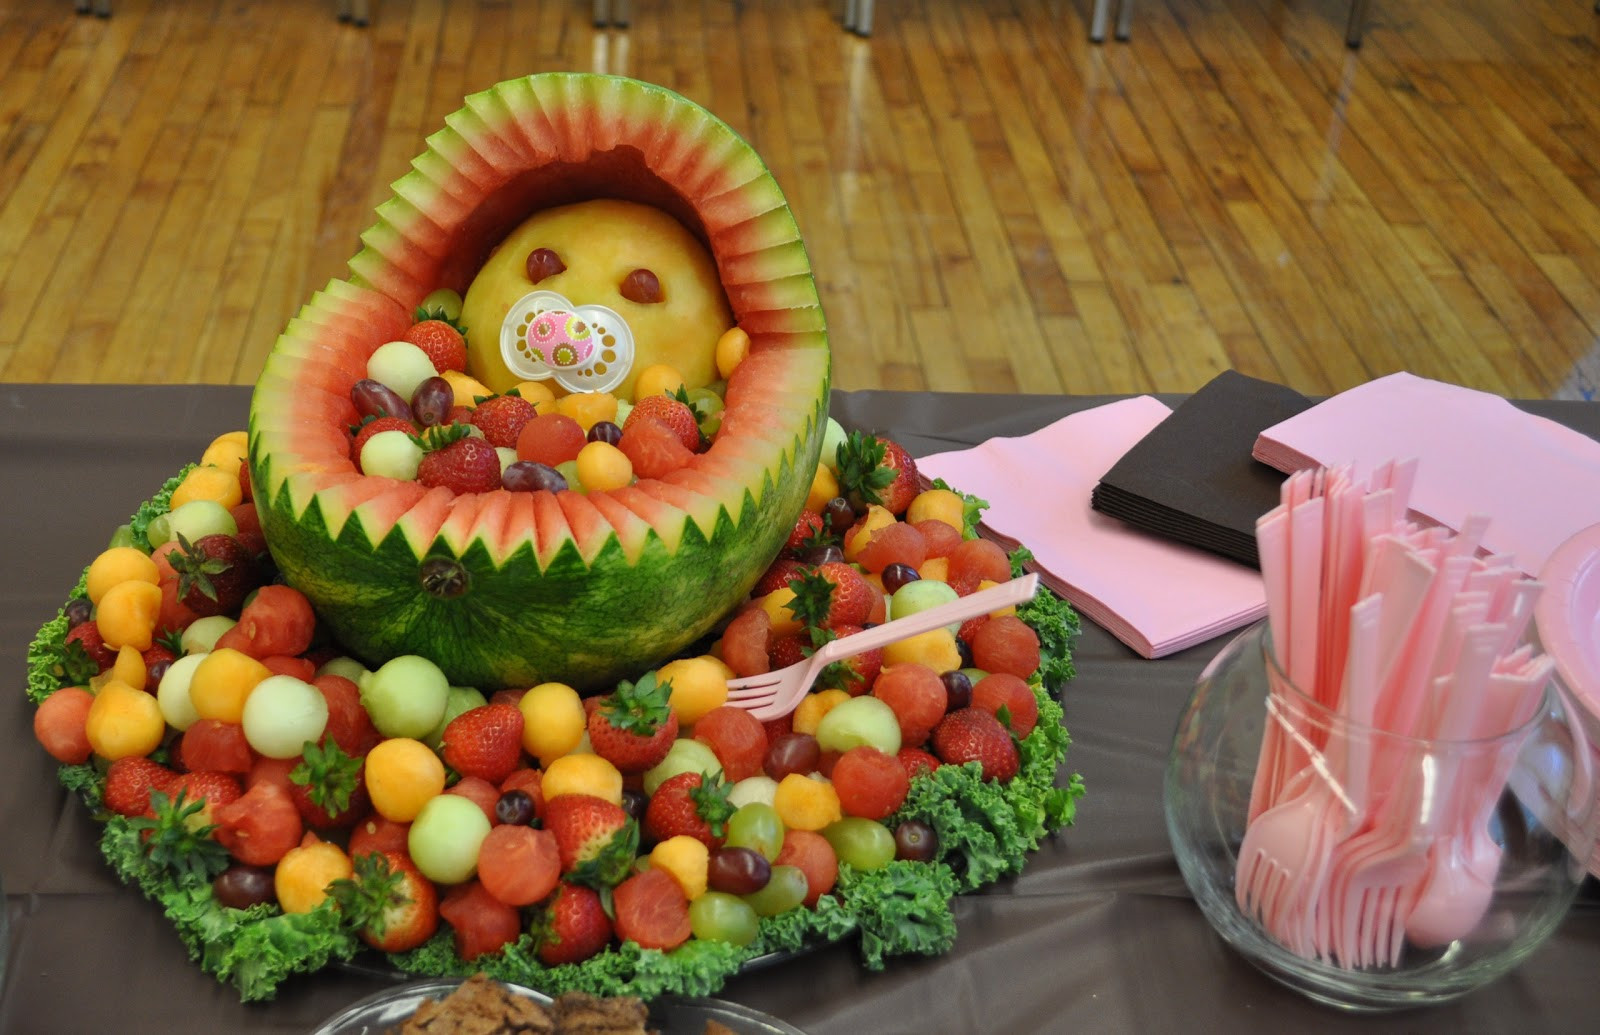 Party Food Ideas For Baby Shower
 Design to Shine Fruit Baby Shower idea